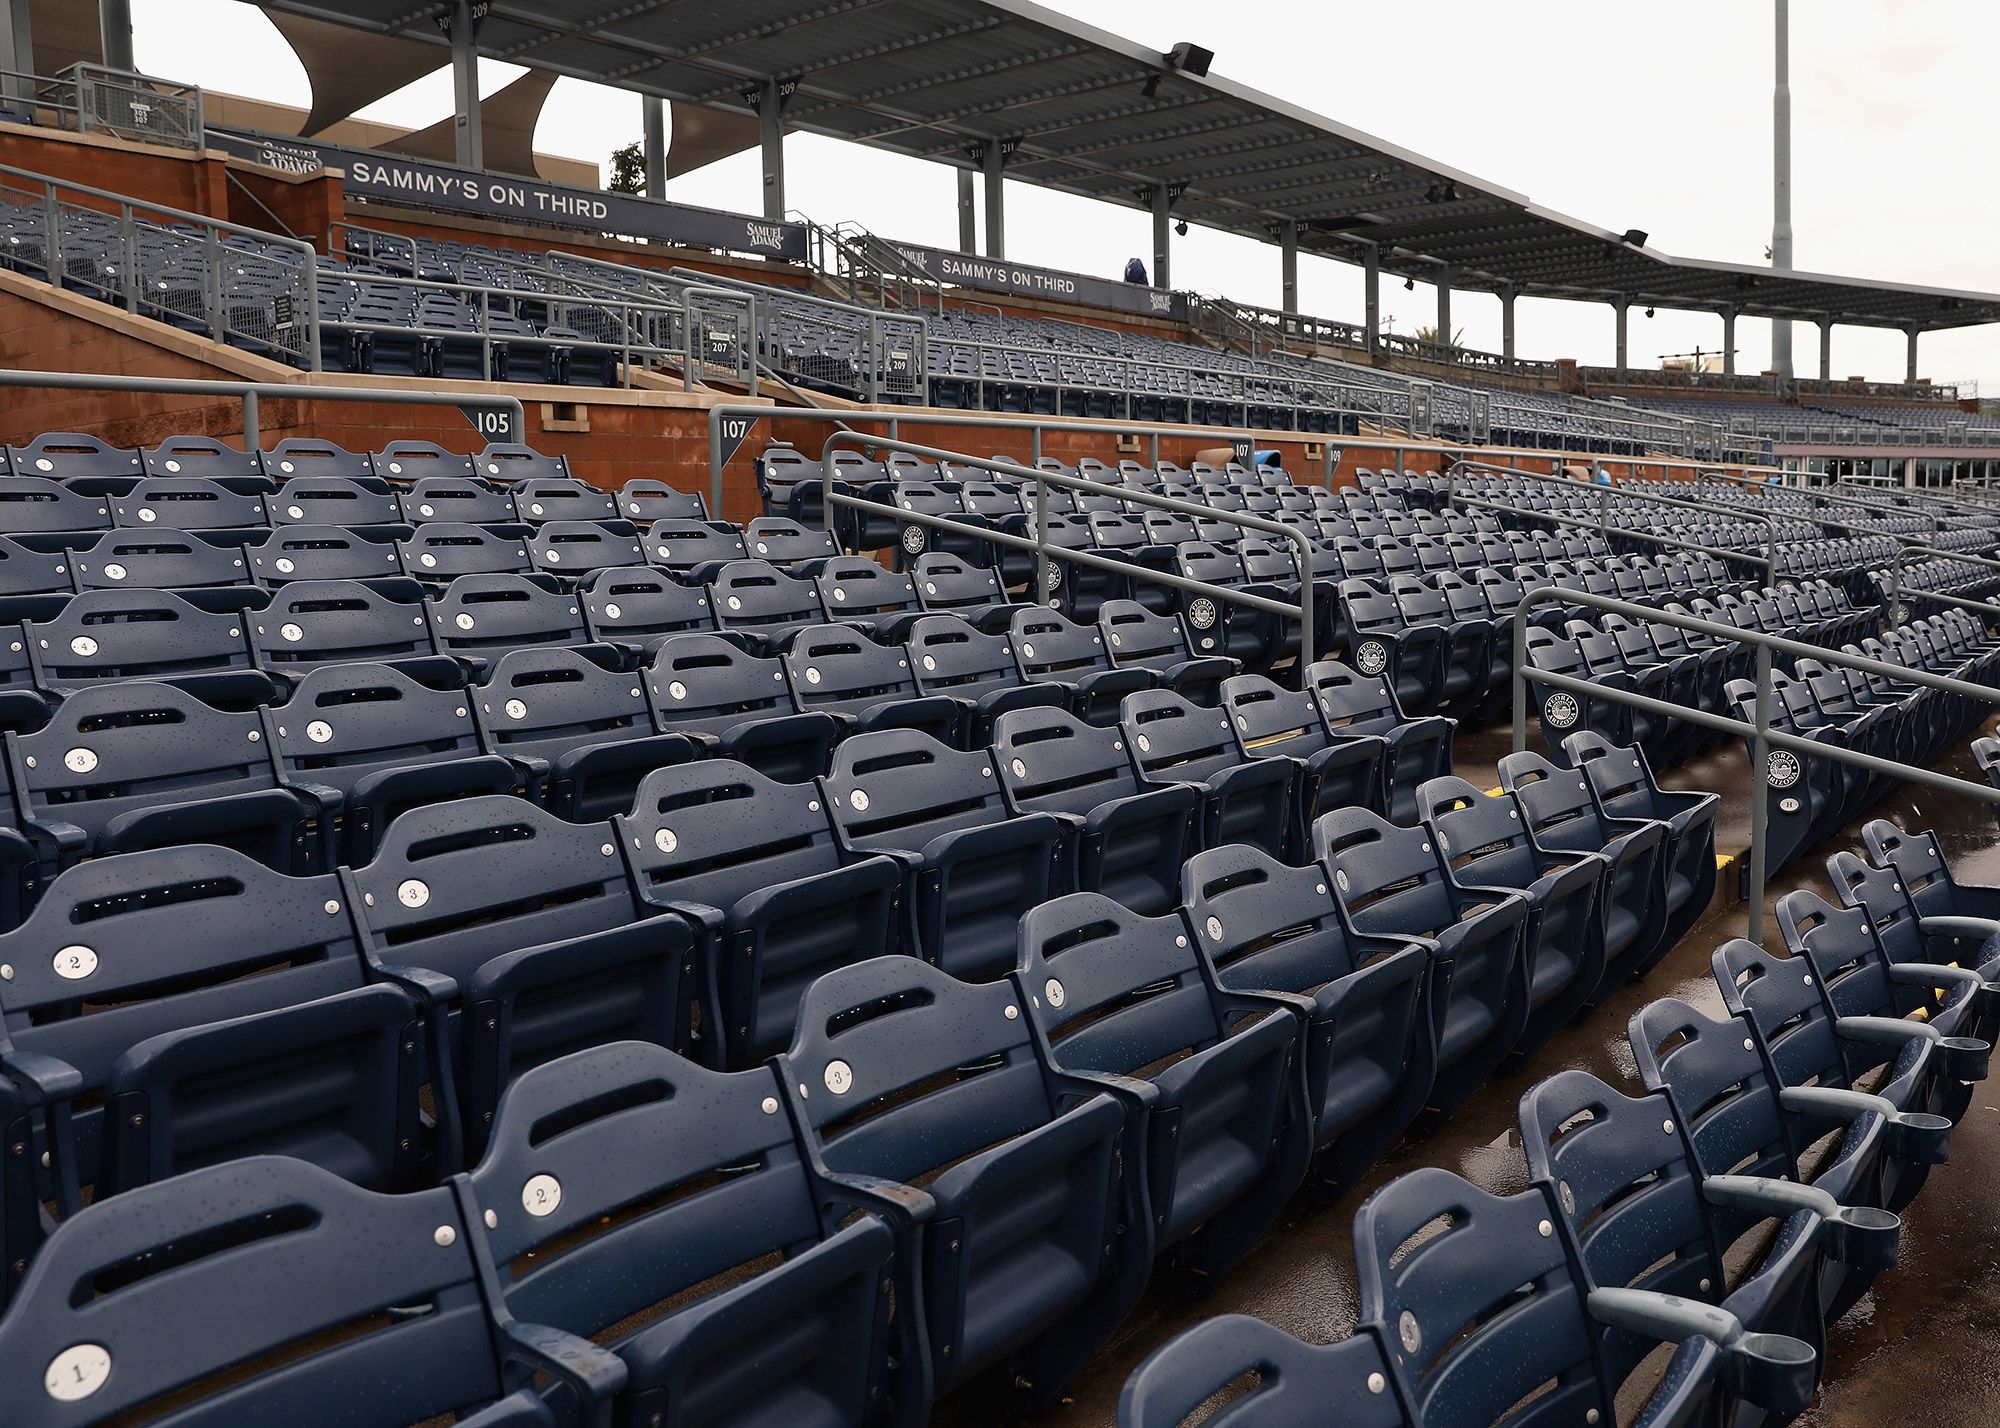 No fans, no fun: Athletes uneasy over empty-arena solutions to coronavirus  – The Denver Post